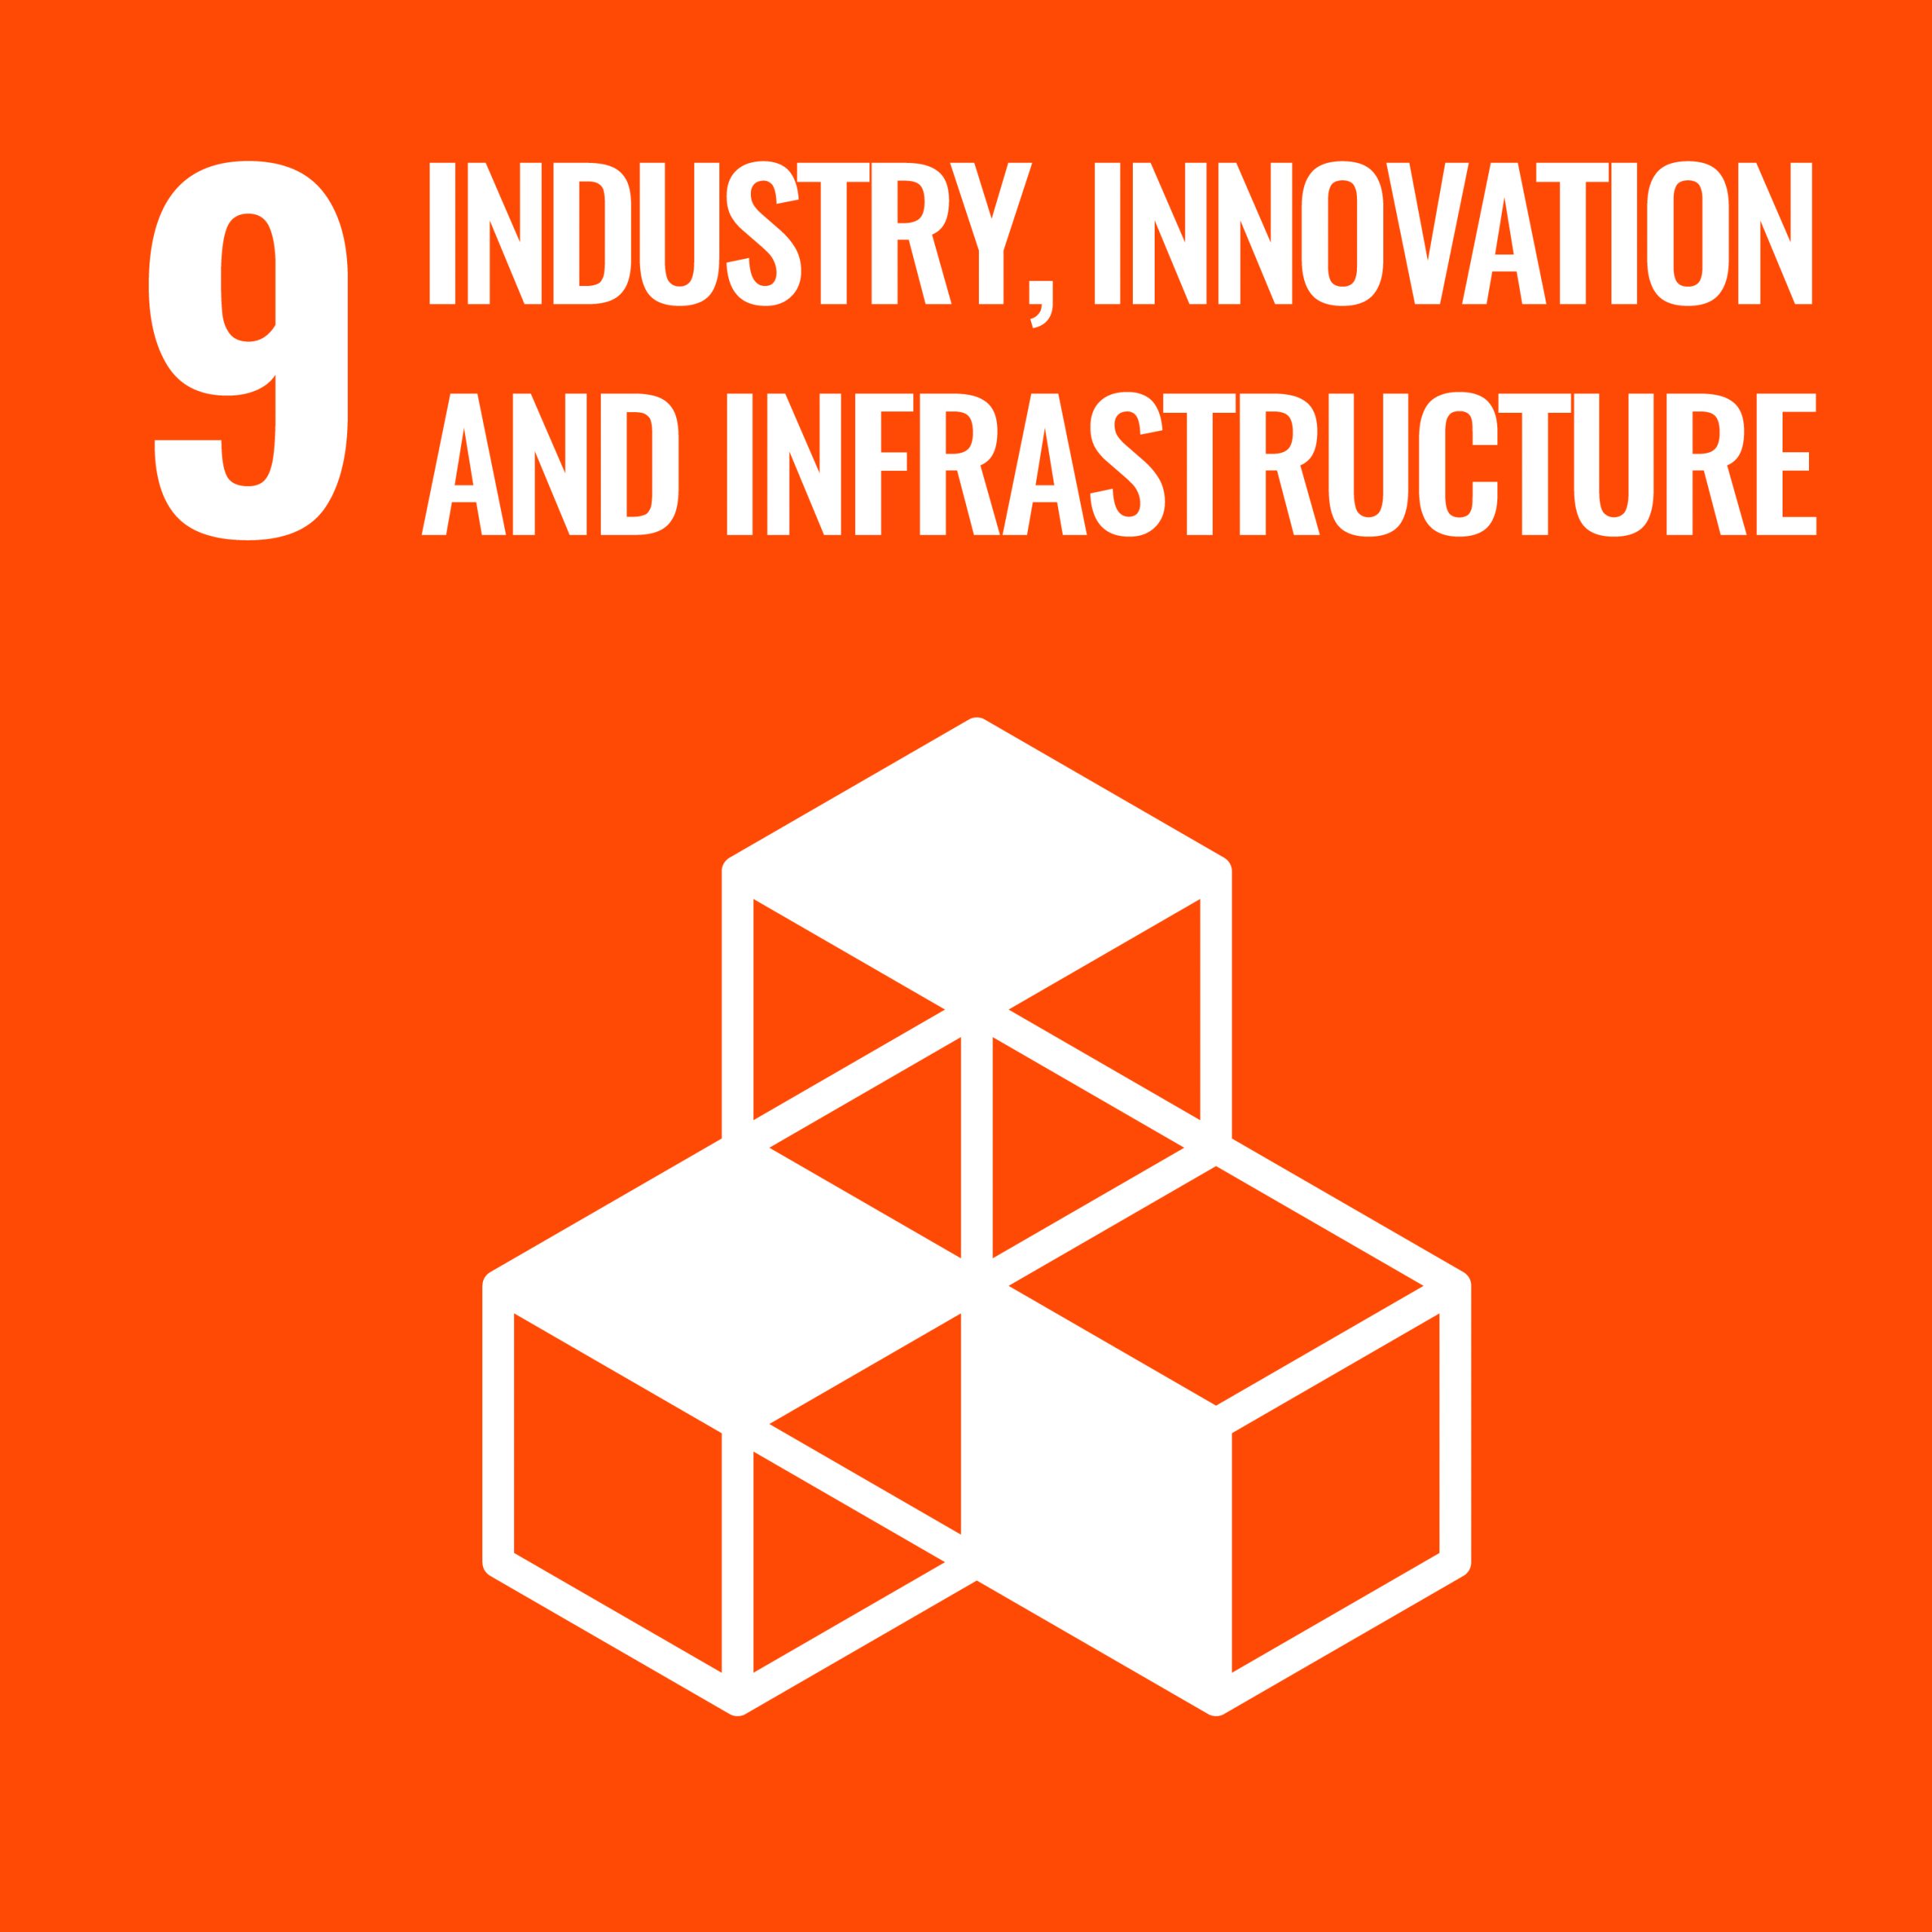 Industry, innovation and Infrastructure - SDG 9